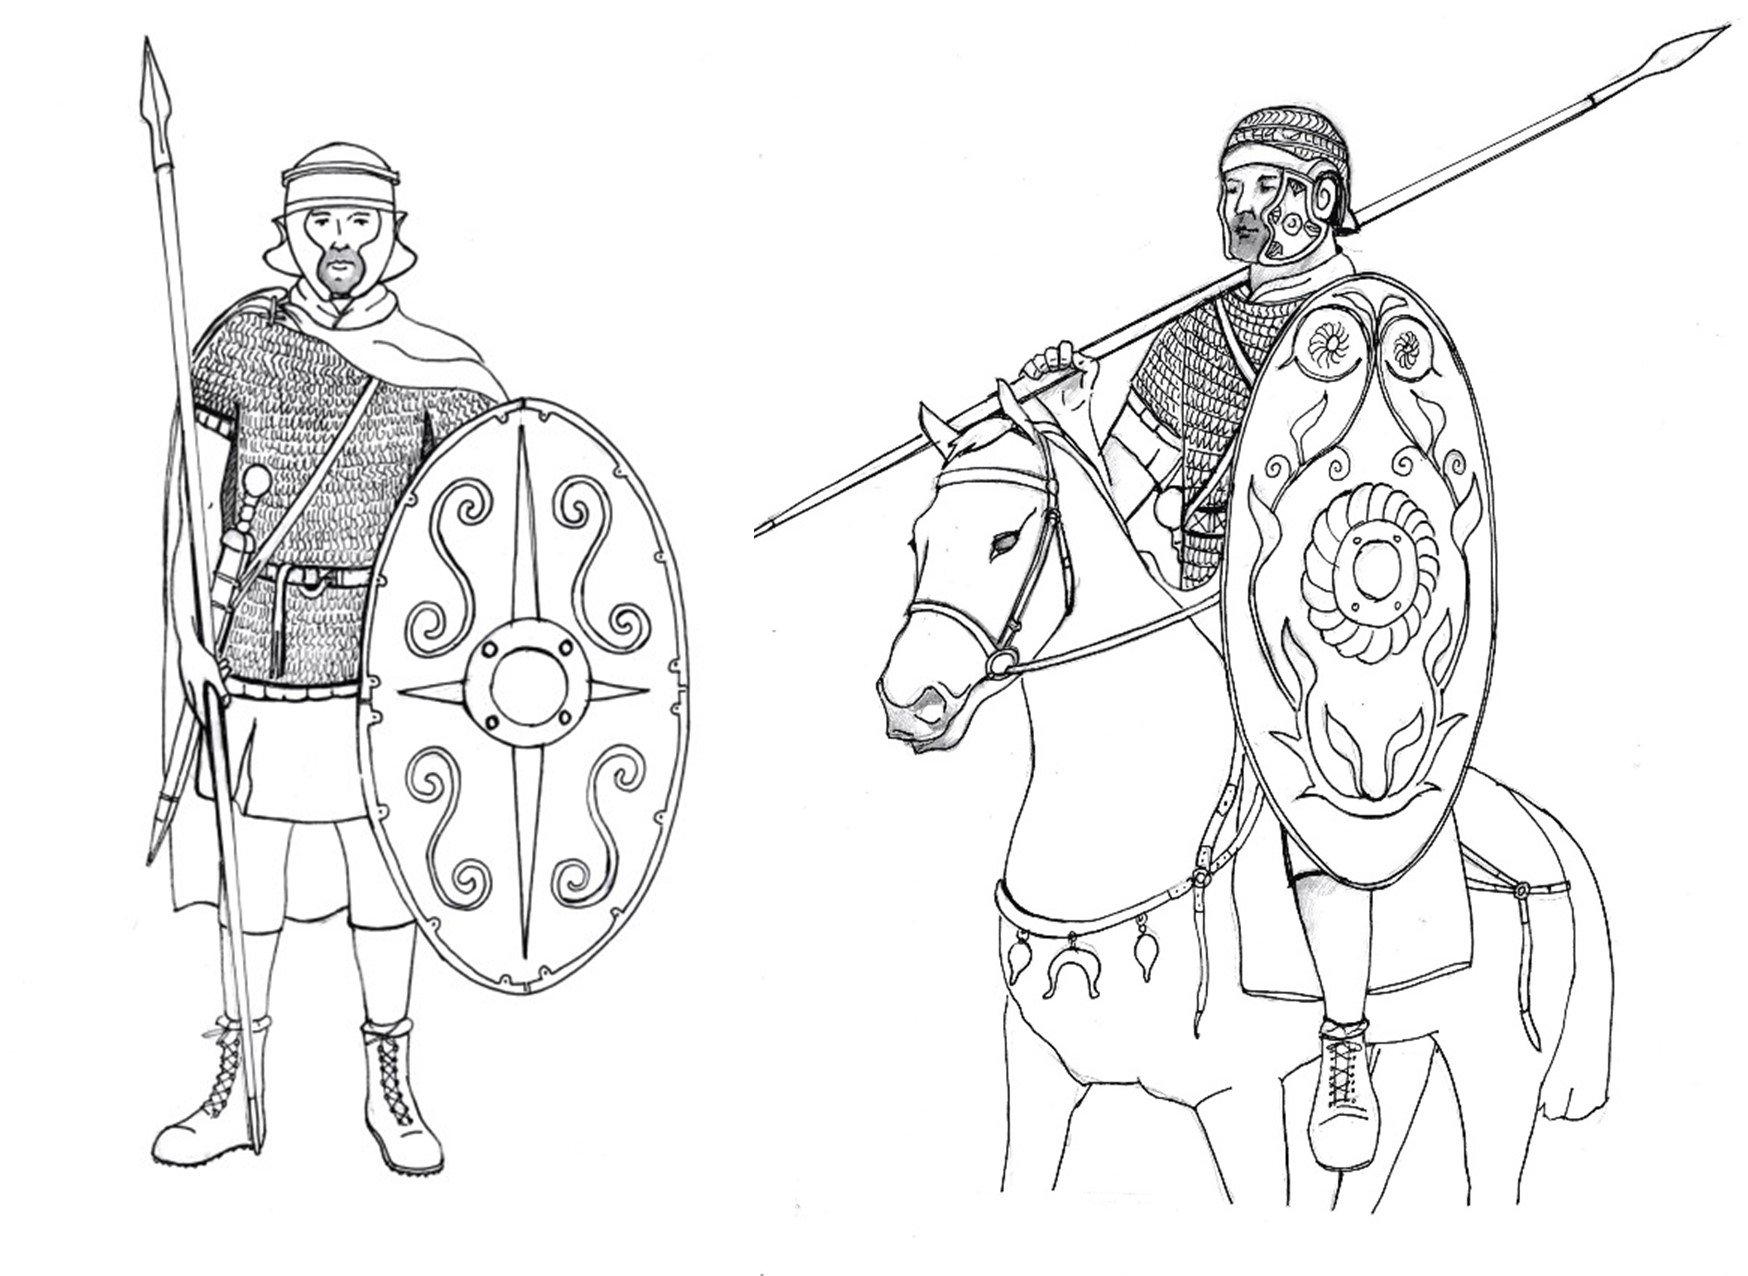 Illustration of infantry soldier and an Illustration of cavalry soldier